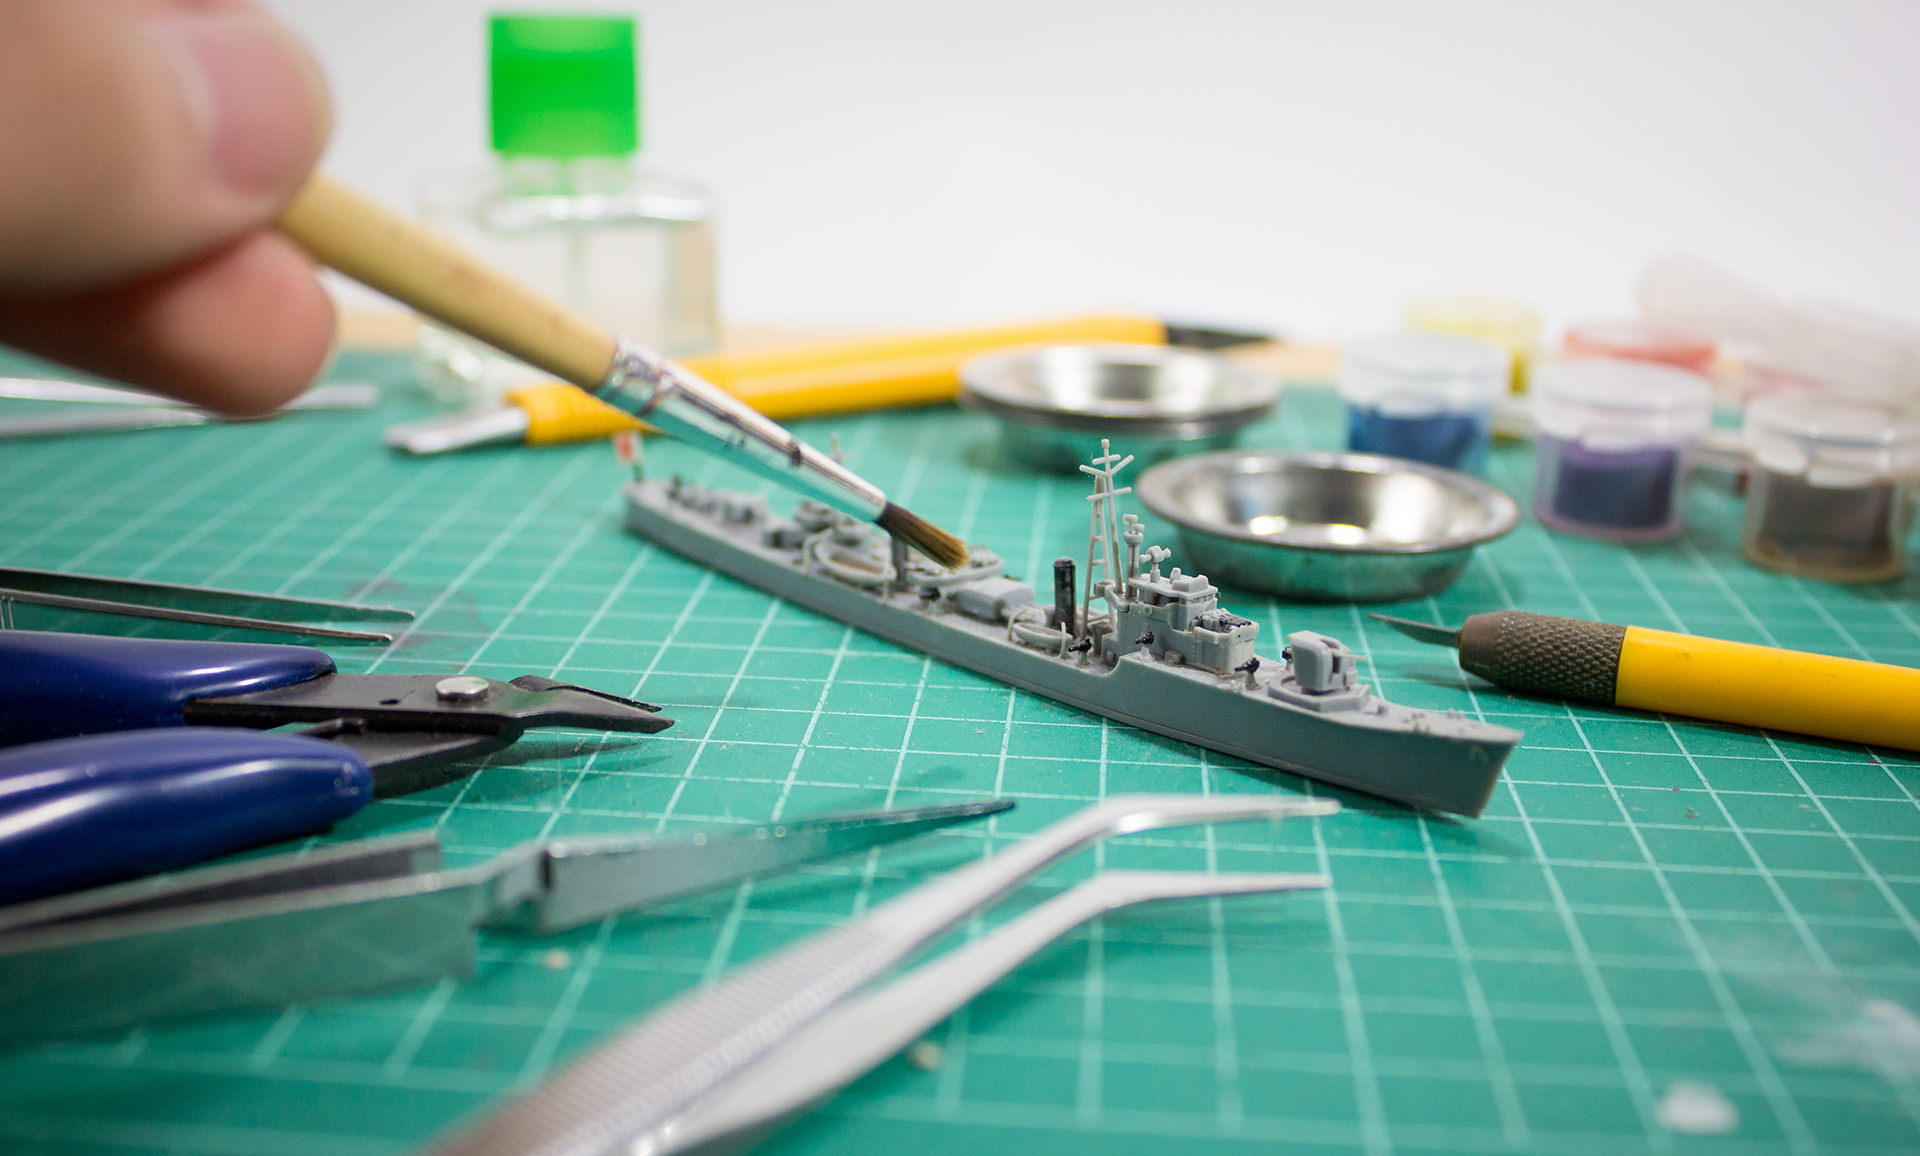 Blog: Painting plastic models correctly - this is how it's done!